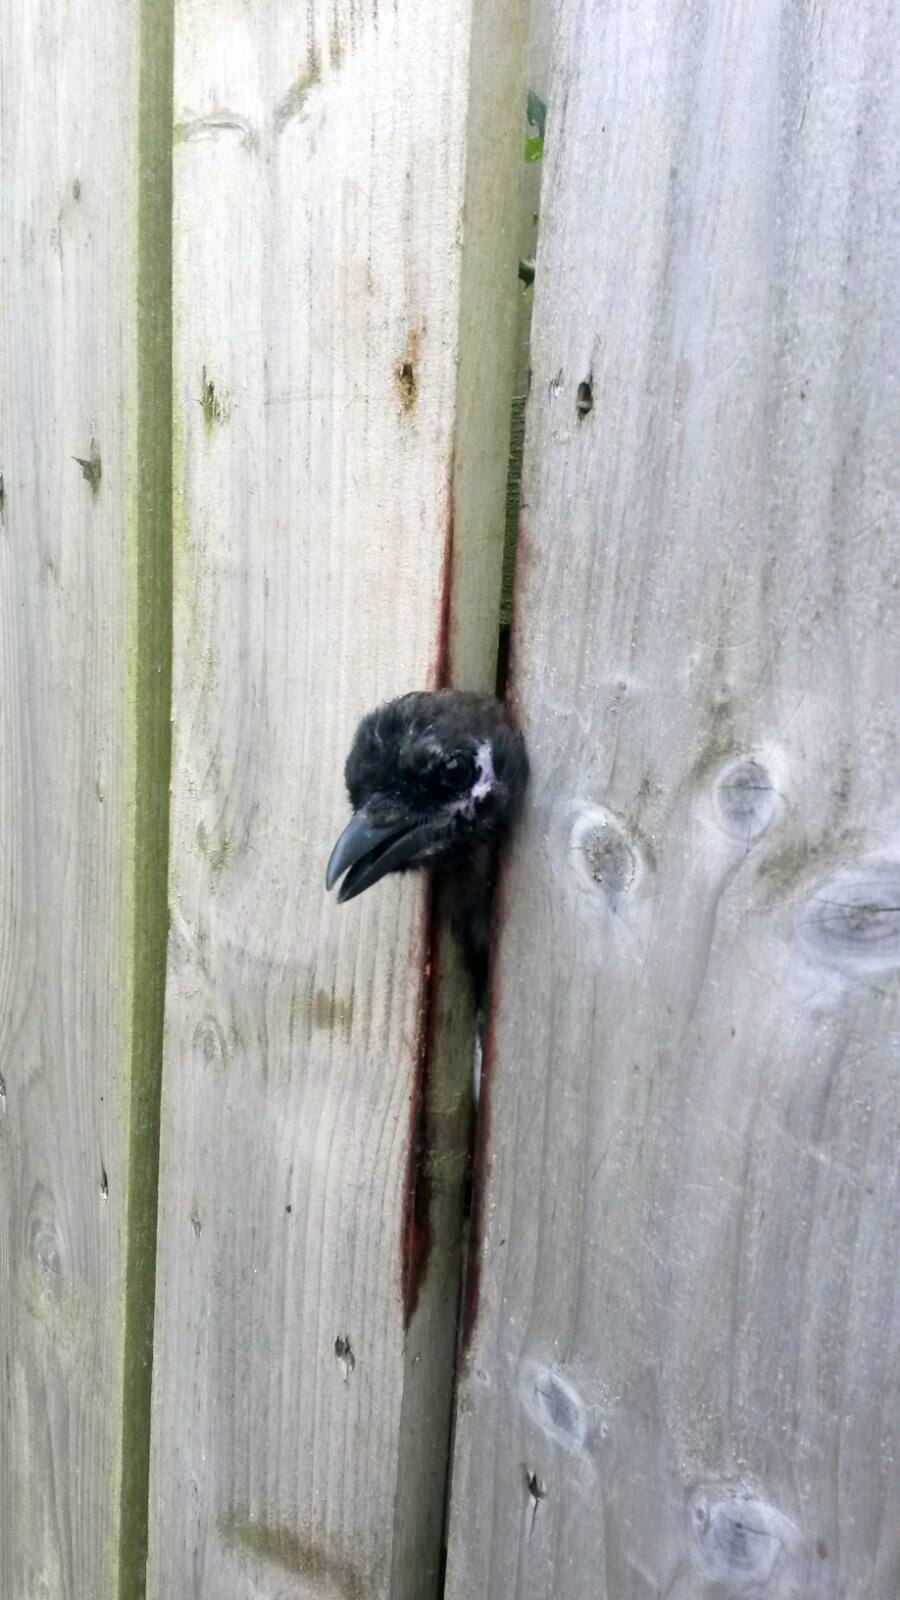 DON’T FENCE ME IN: The magpie with his head stuck between two planks